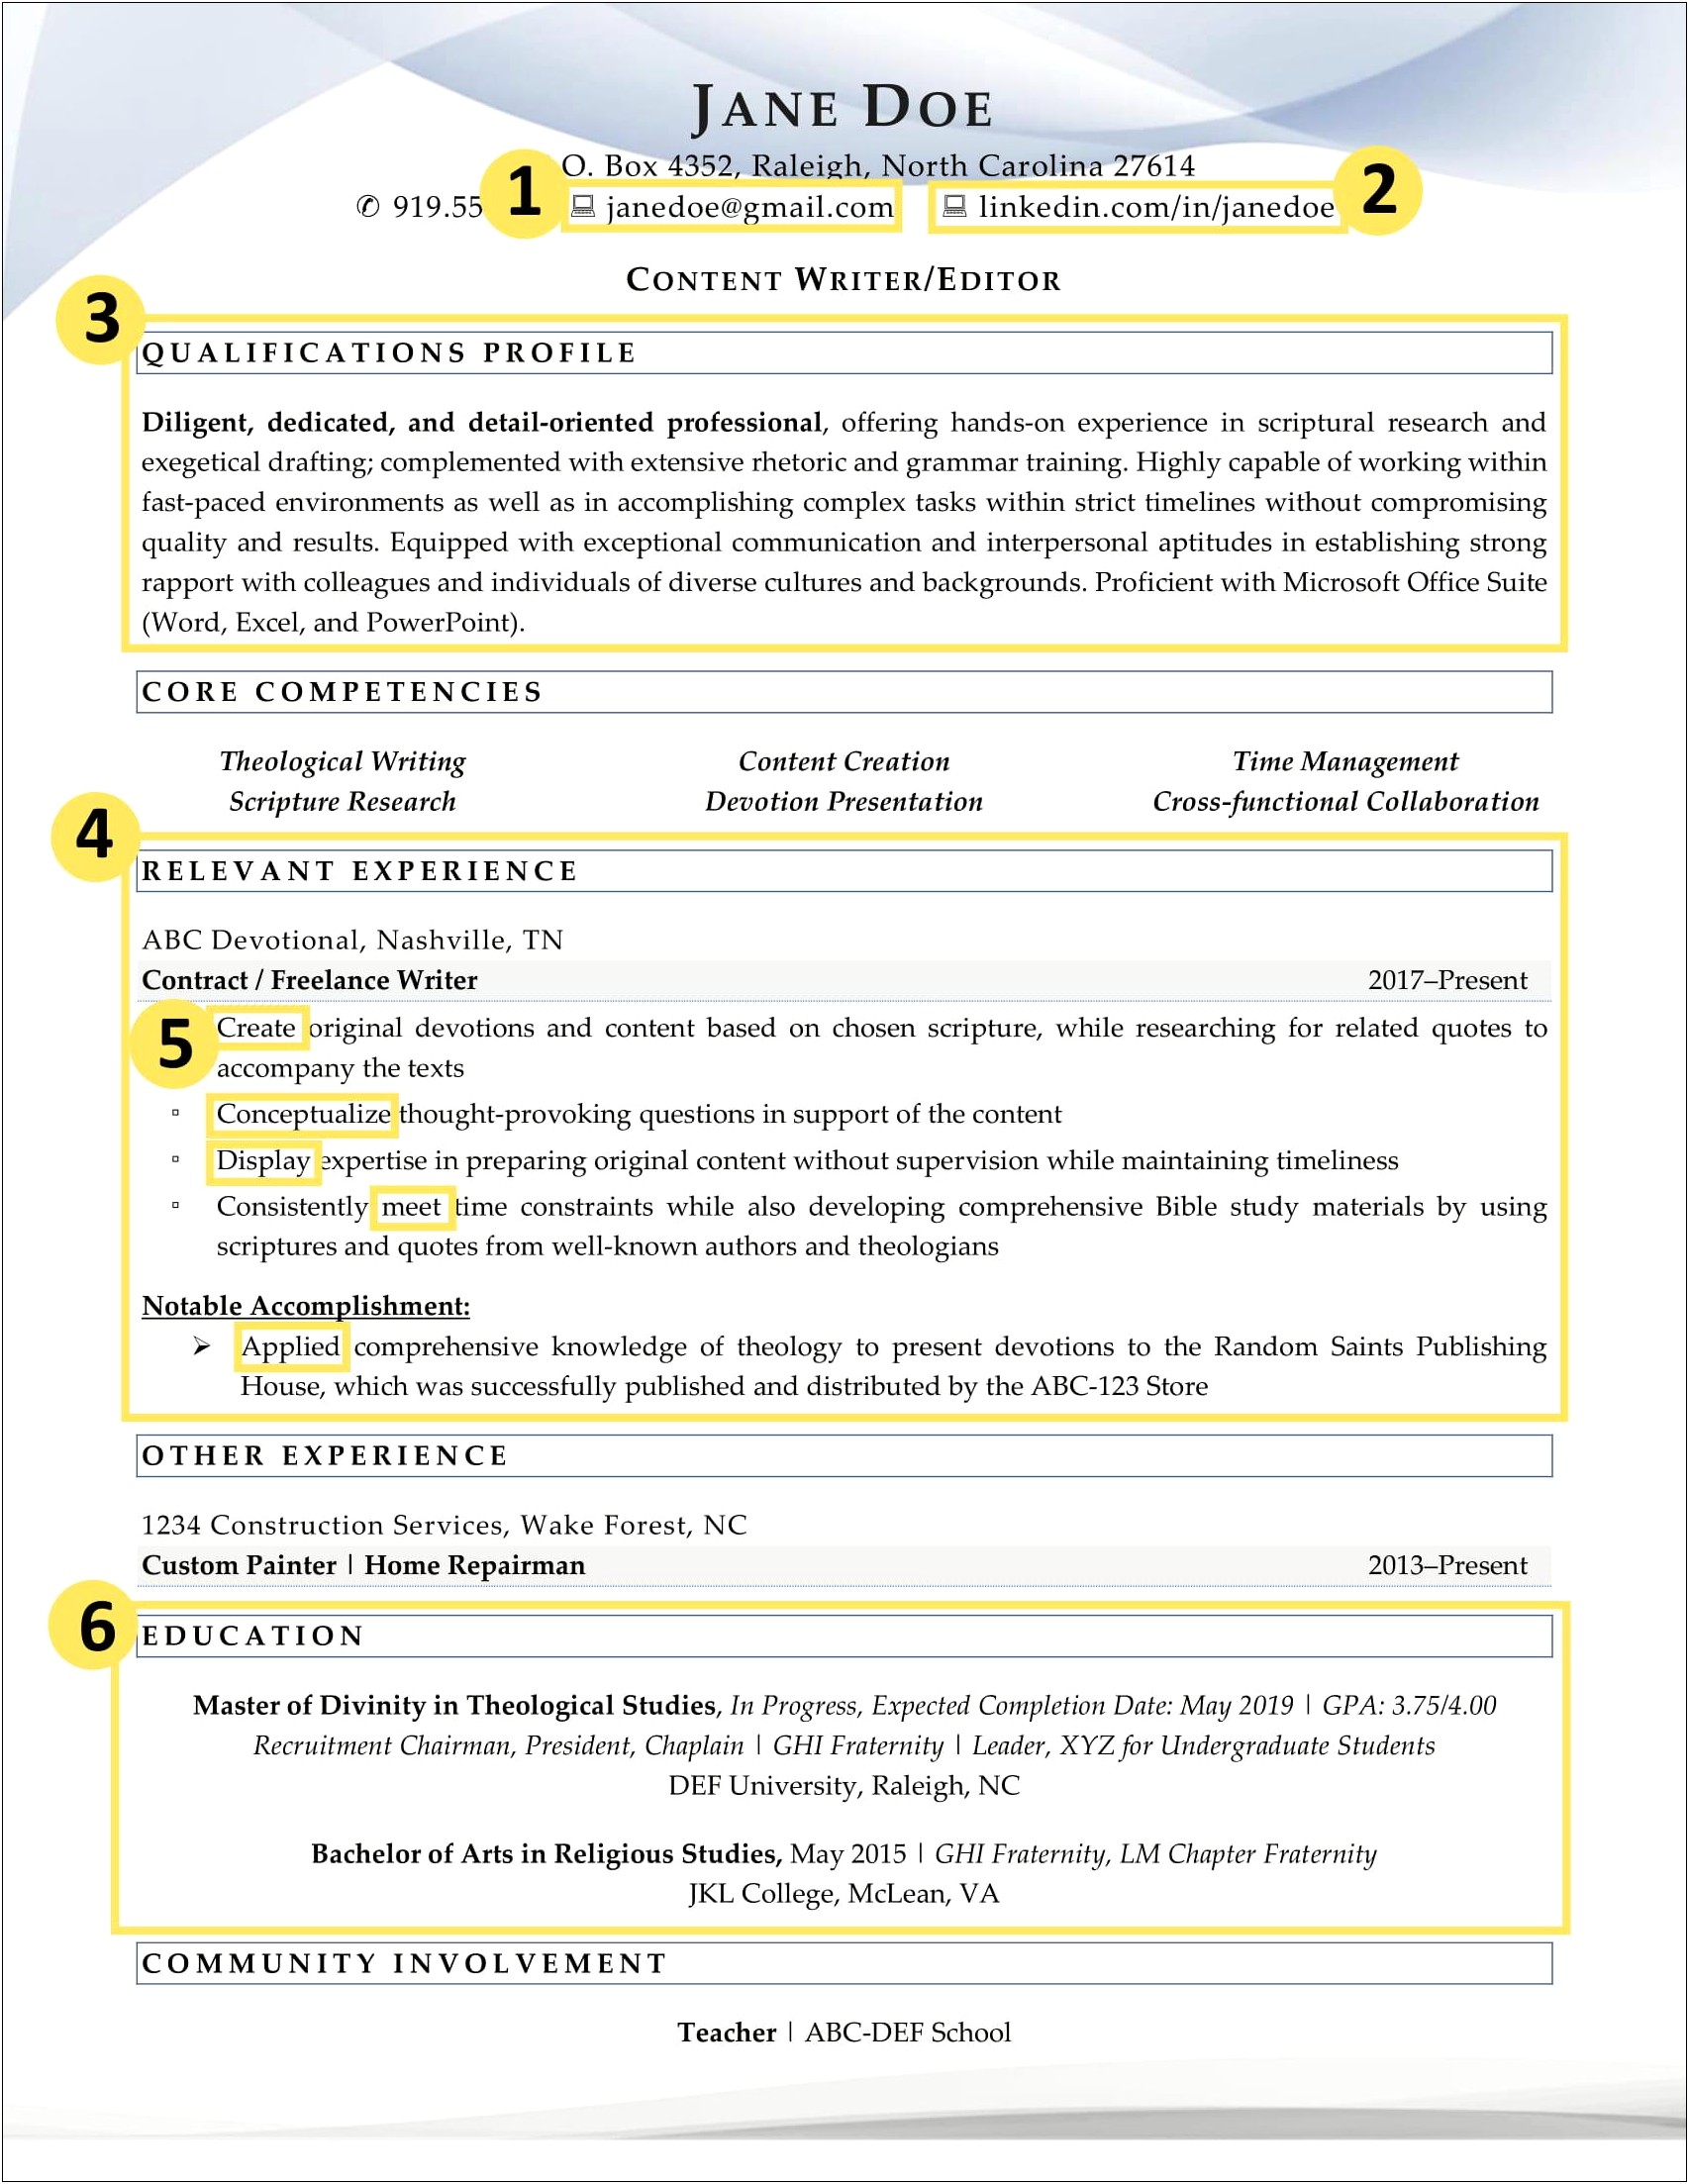 Resume Example For A College Graduate